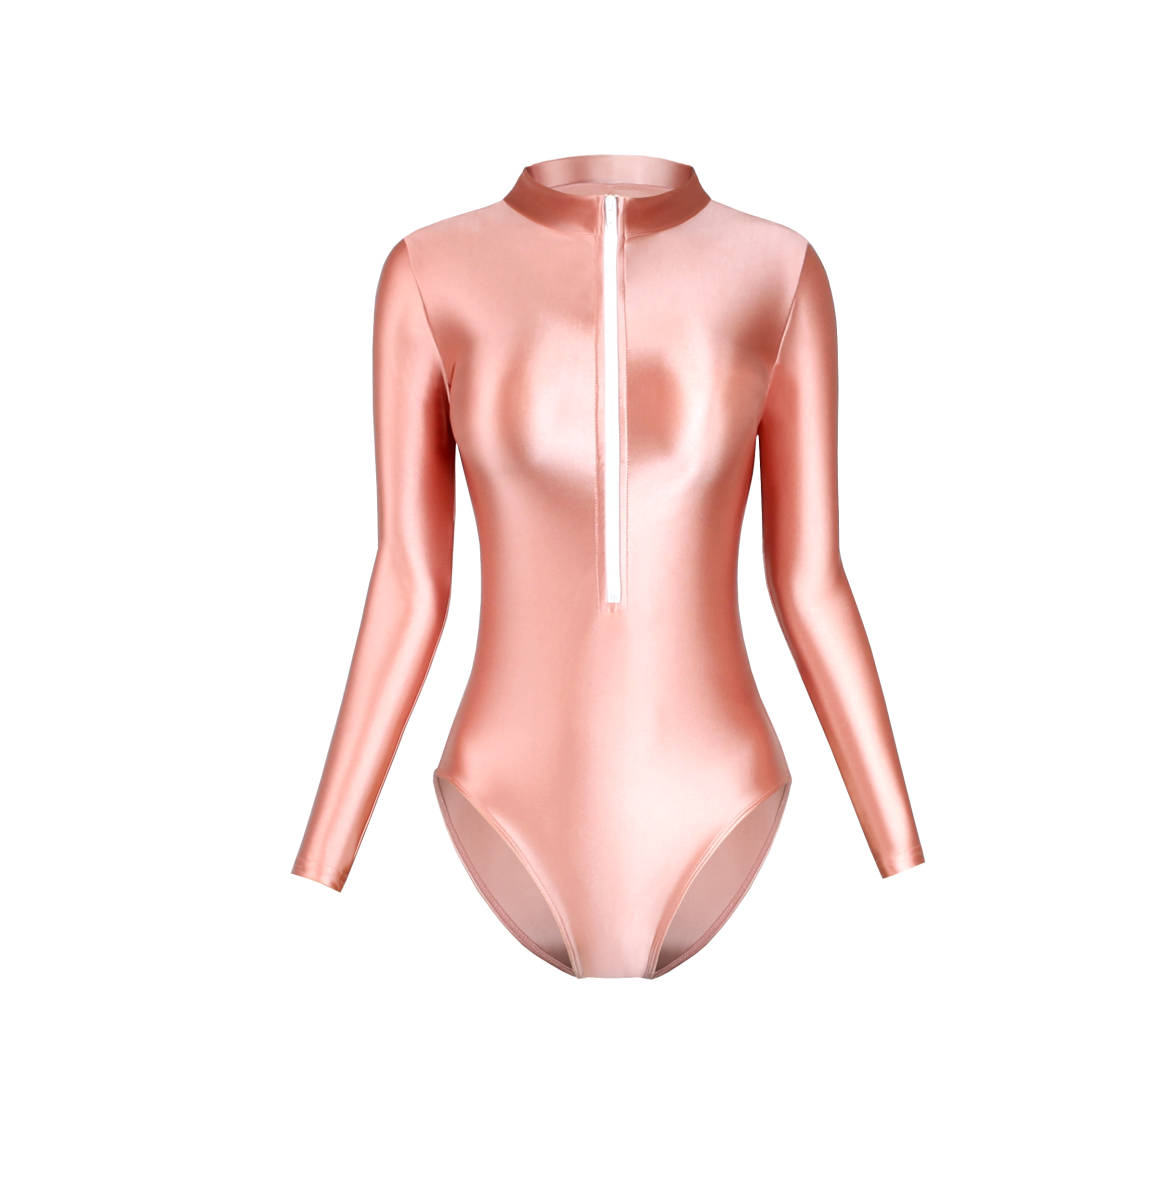 MJINM zentai suit high‐necked long sleeve body suit front jipa yoga suit sexy costume play clothes pink 